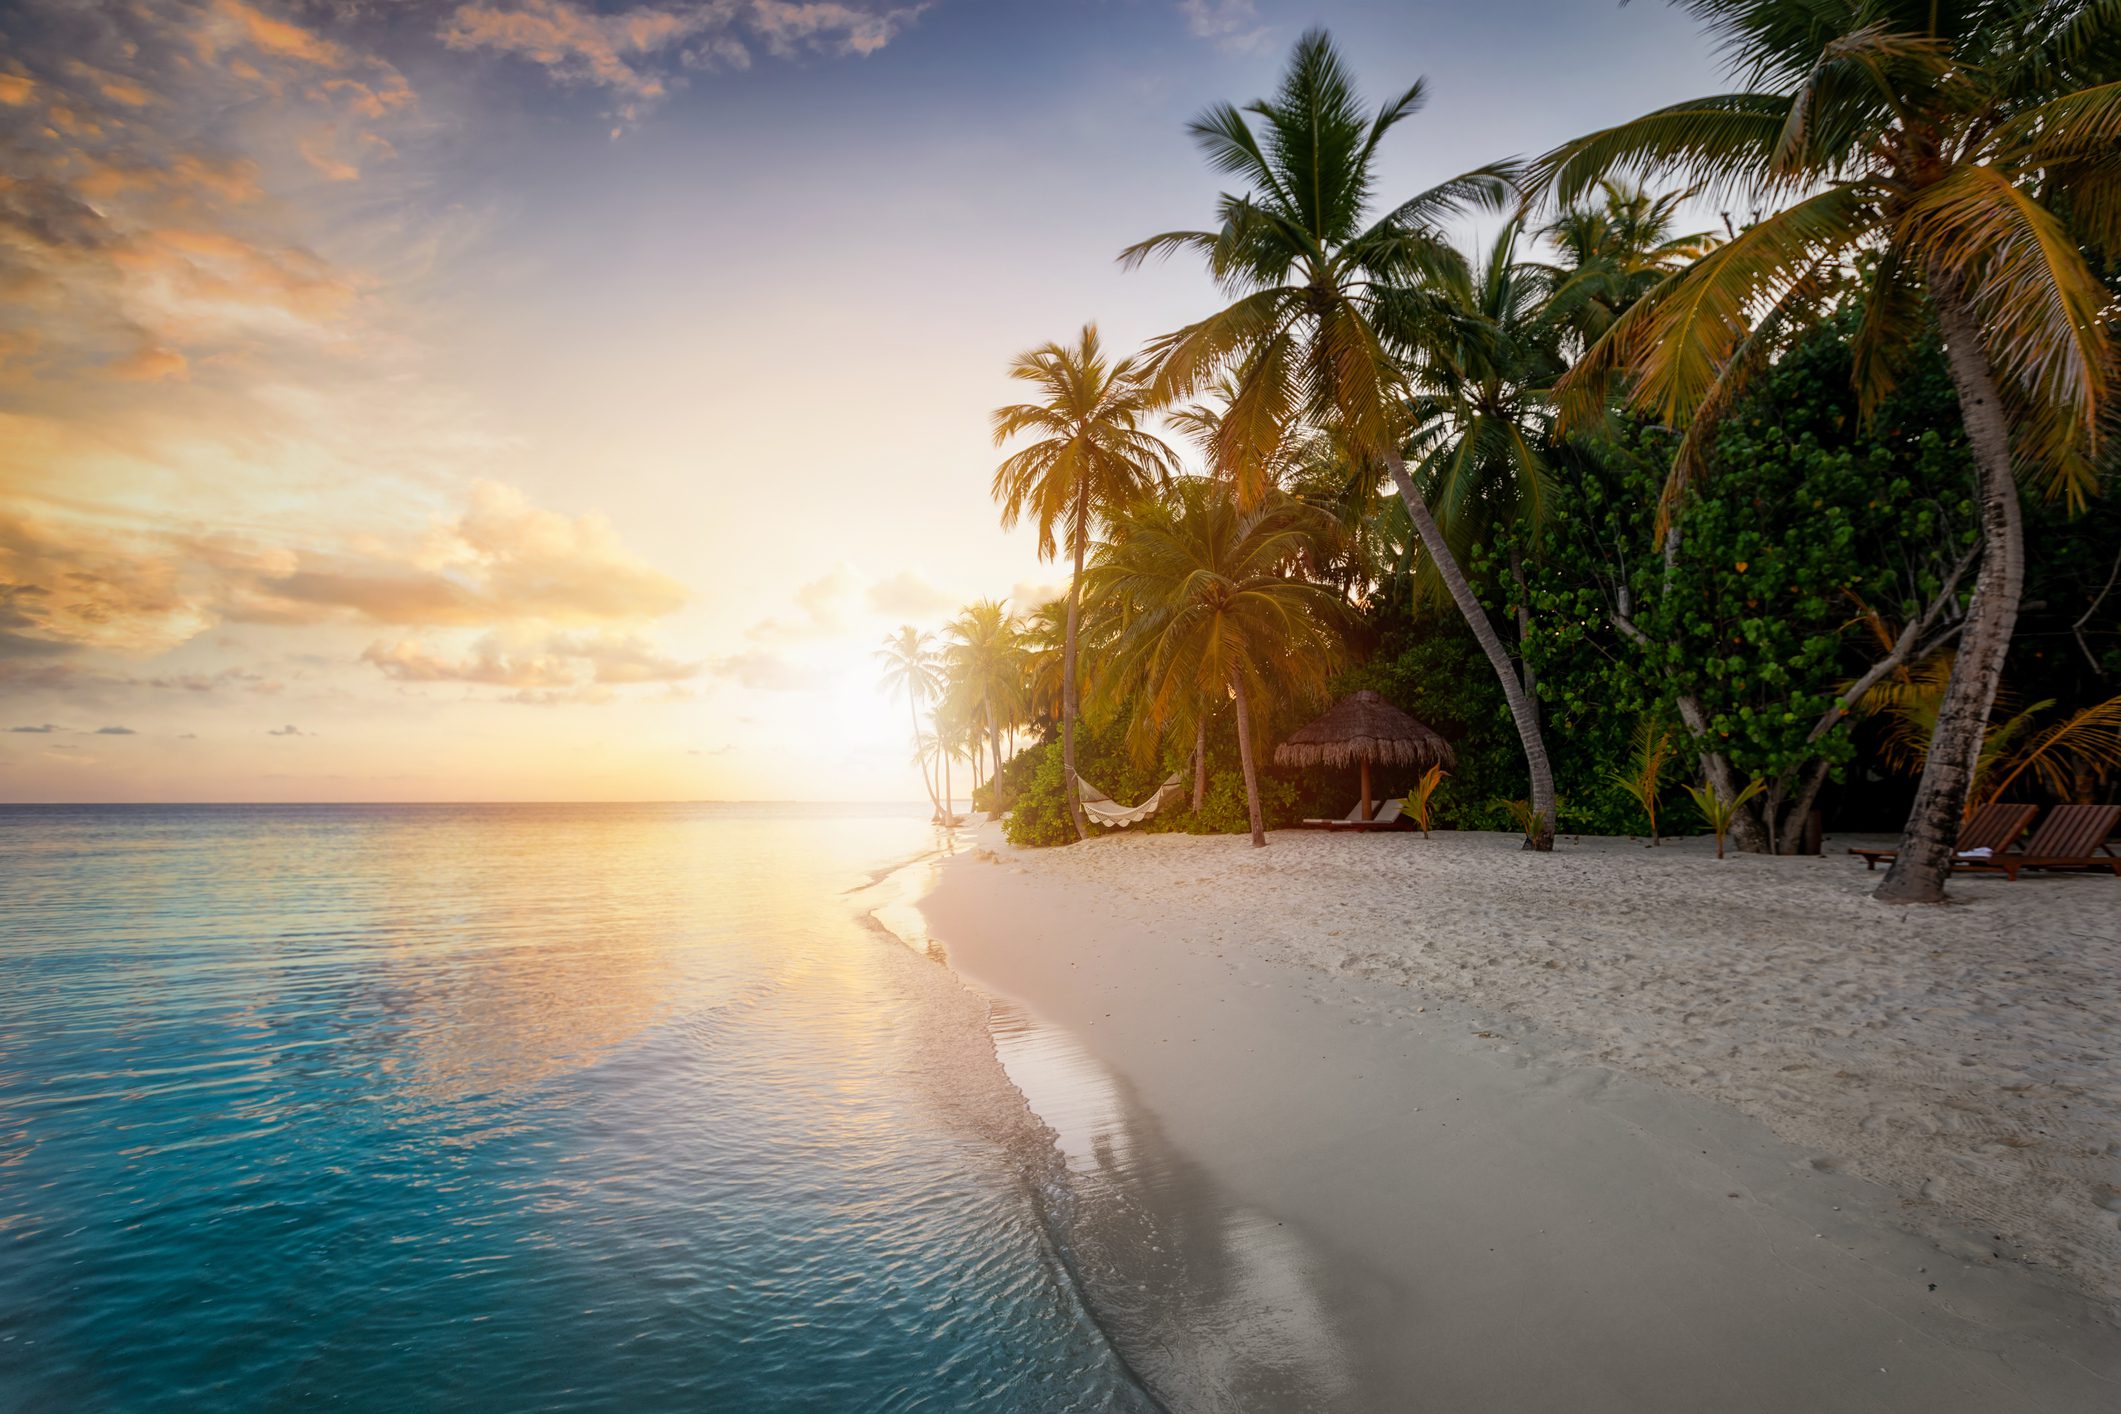 Sunset behind a tropical beach with coconut palm trees, sandy beach and emerald ocean